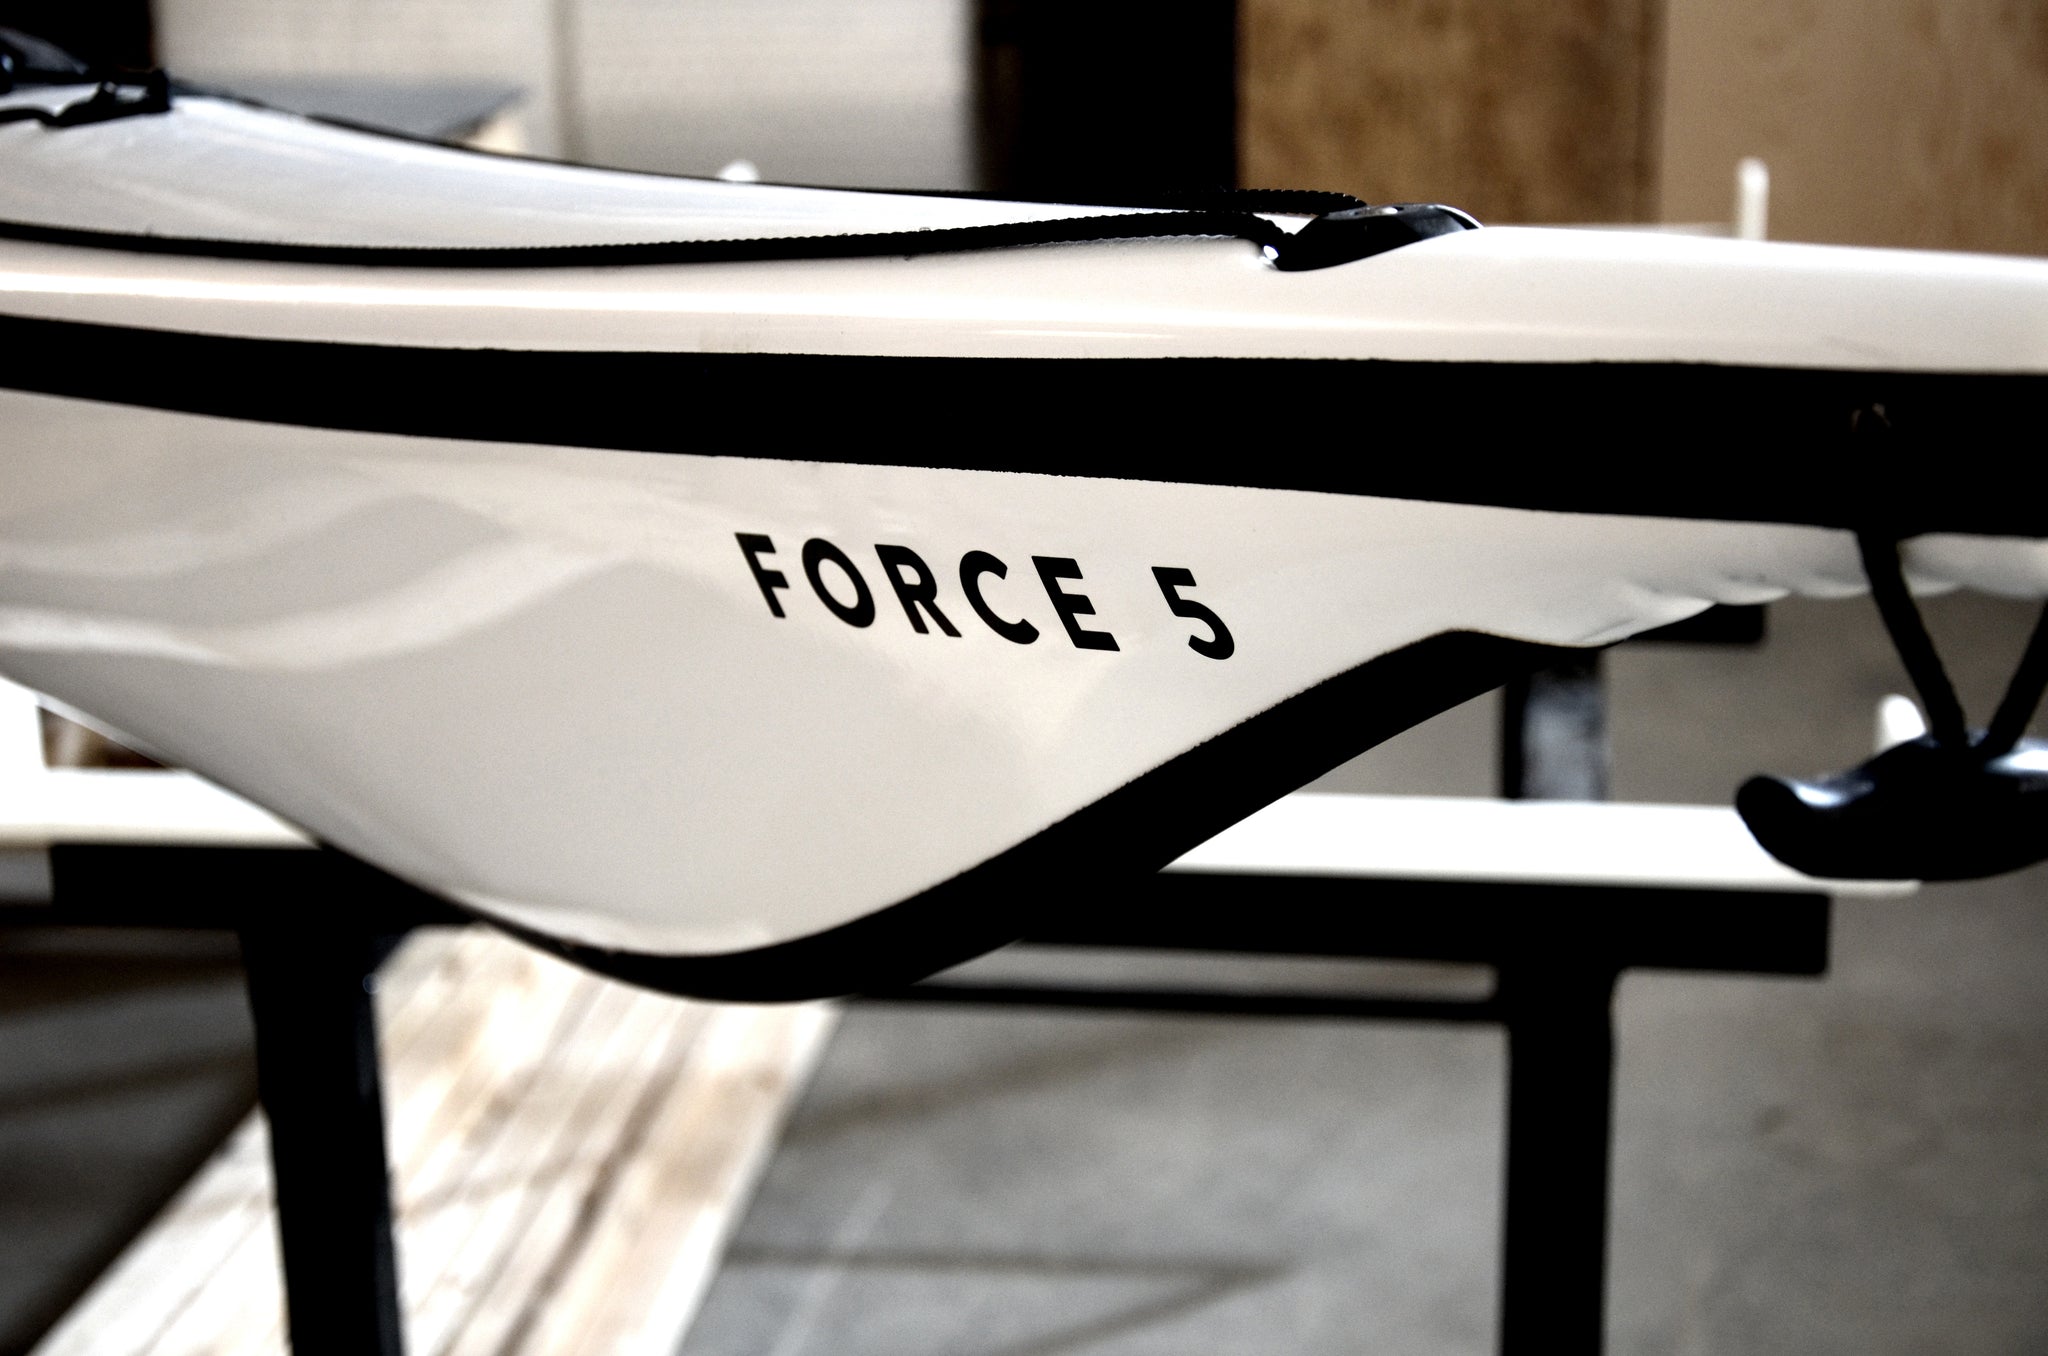 Force series | Force 5 (18')